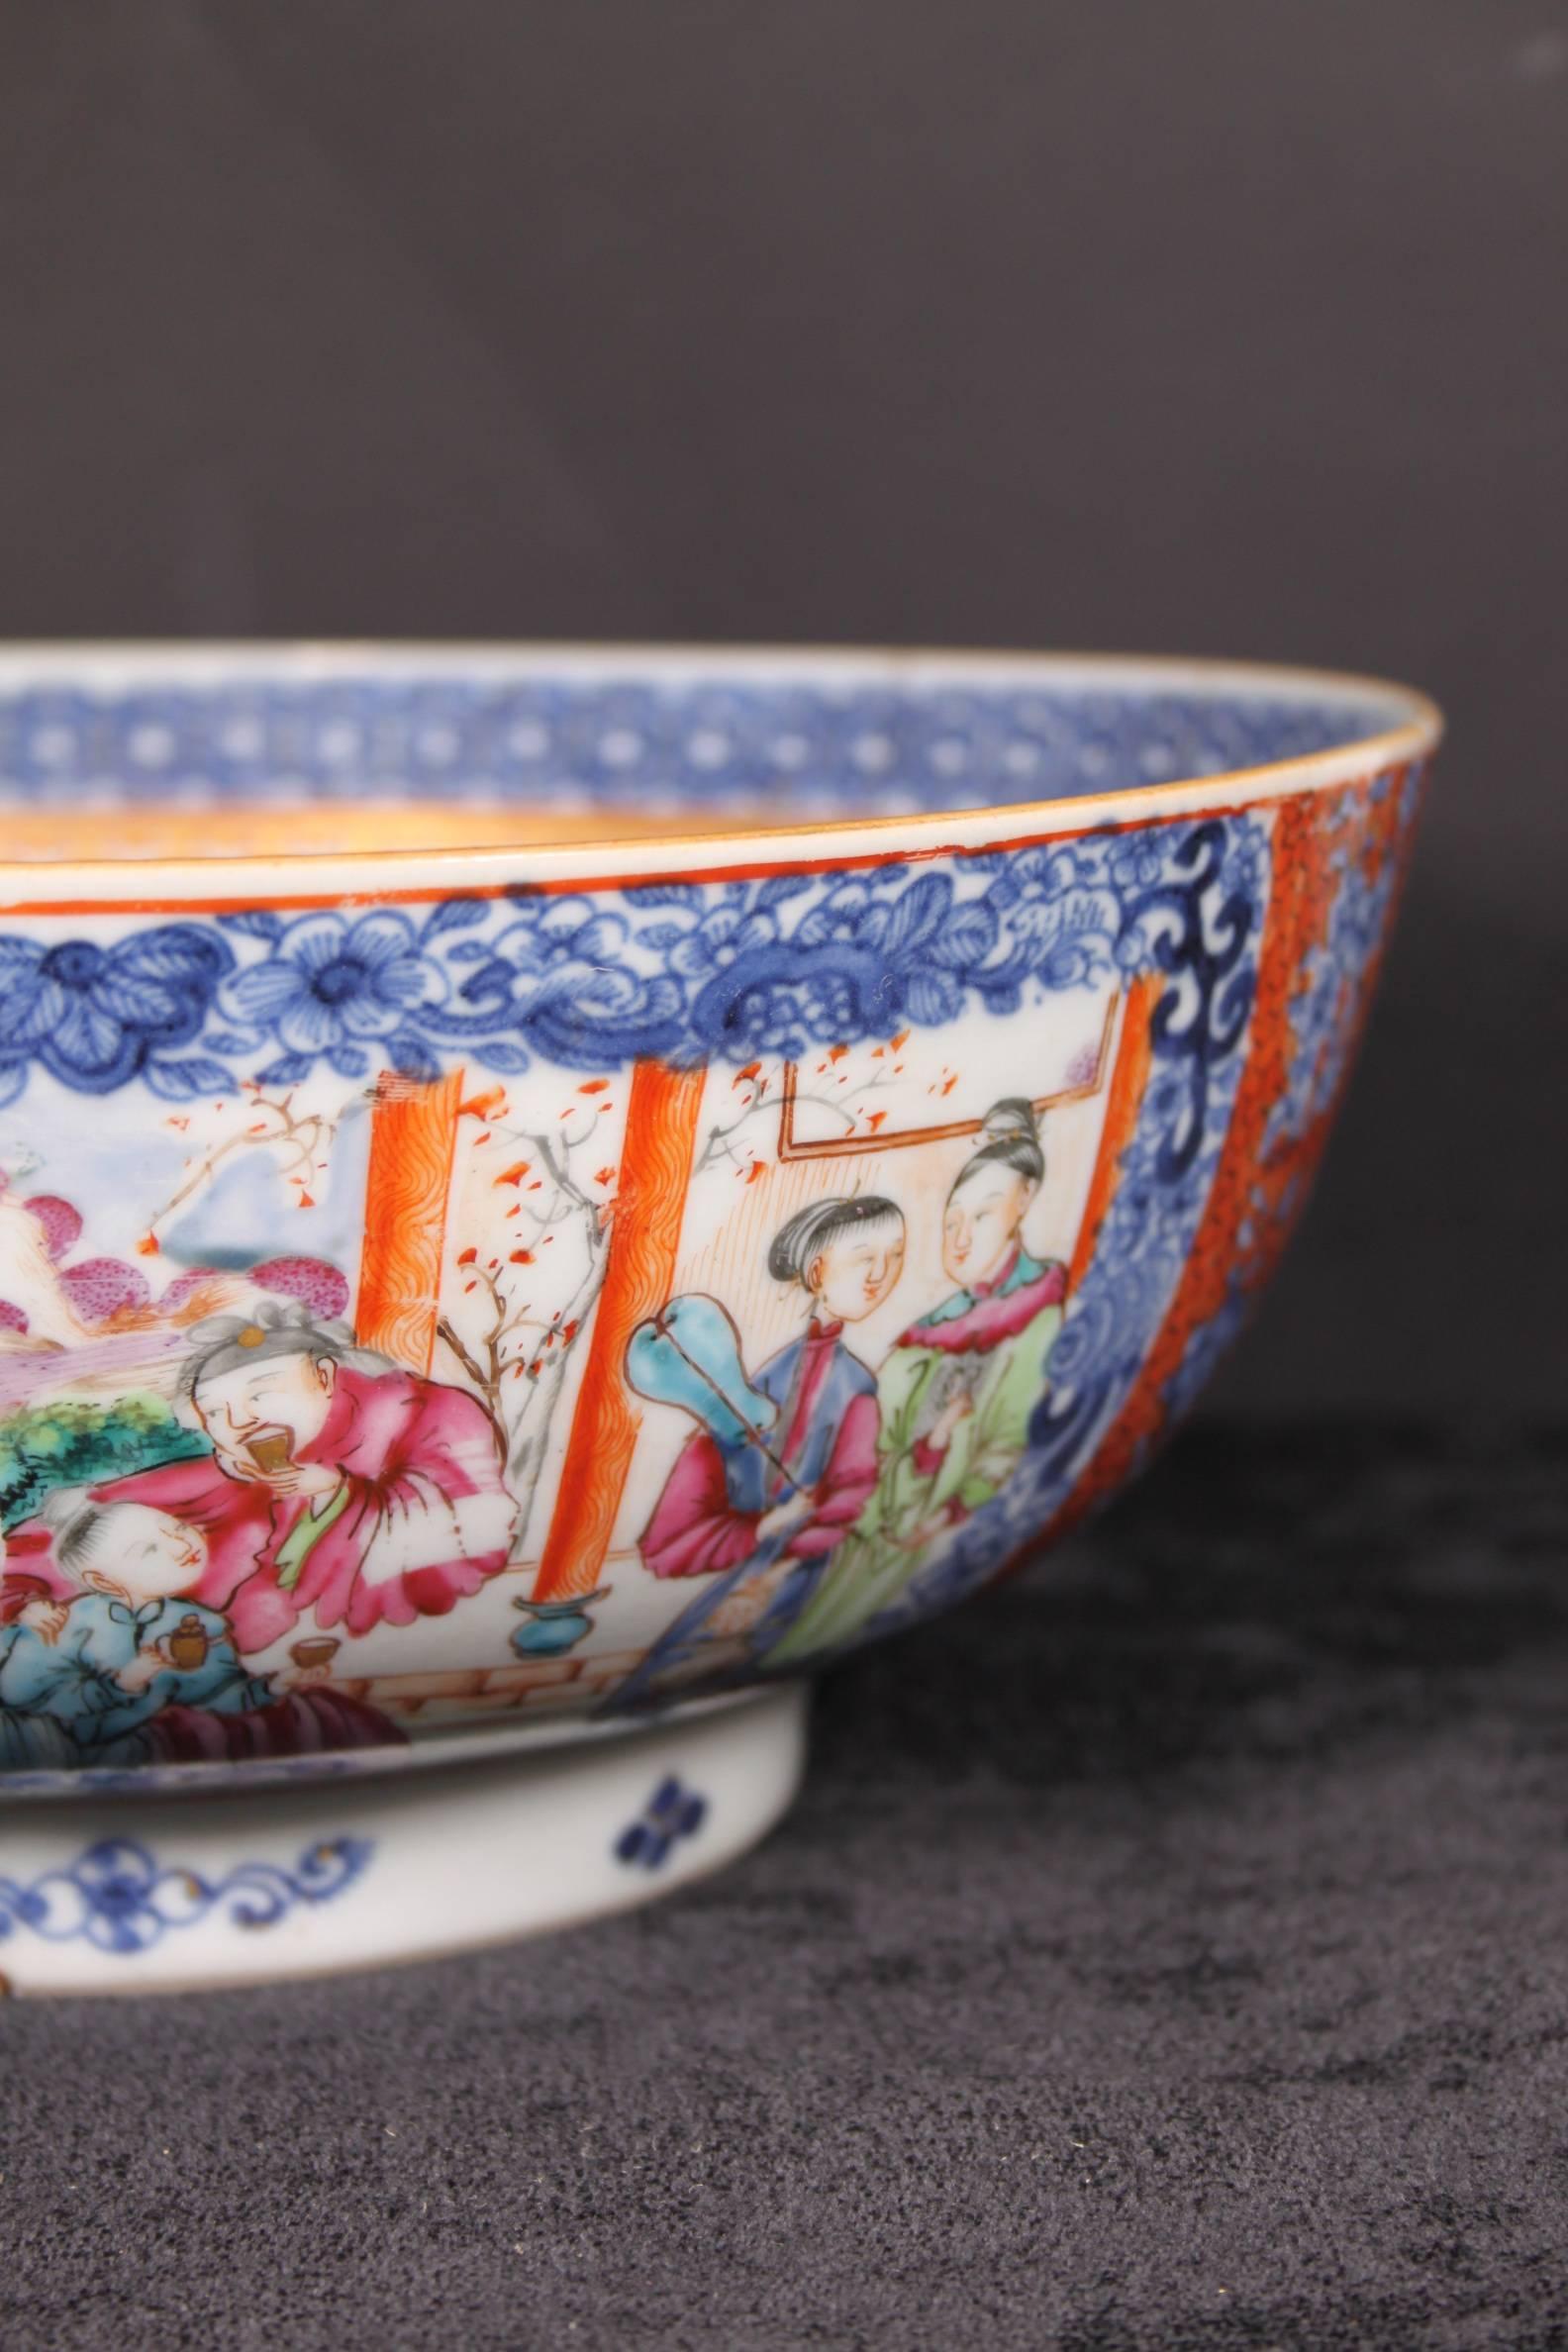 18th Century Qianlong Qing Dynasty Chinese Export Ware Porcelain Punch Bowl For Sale 4